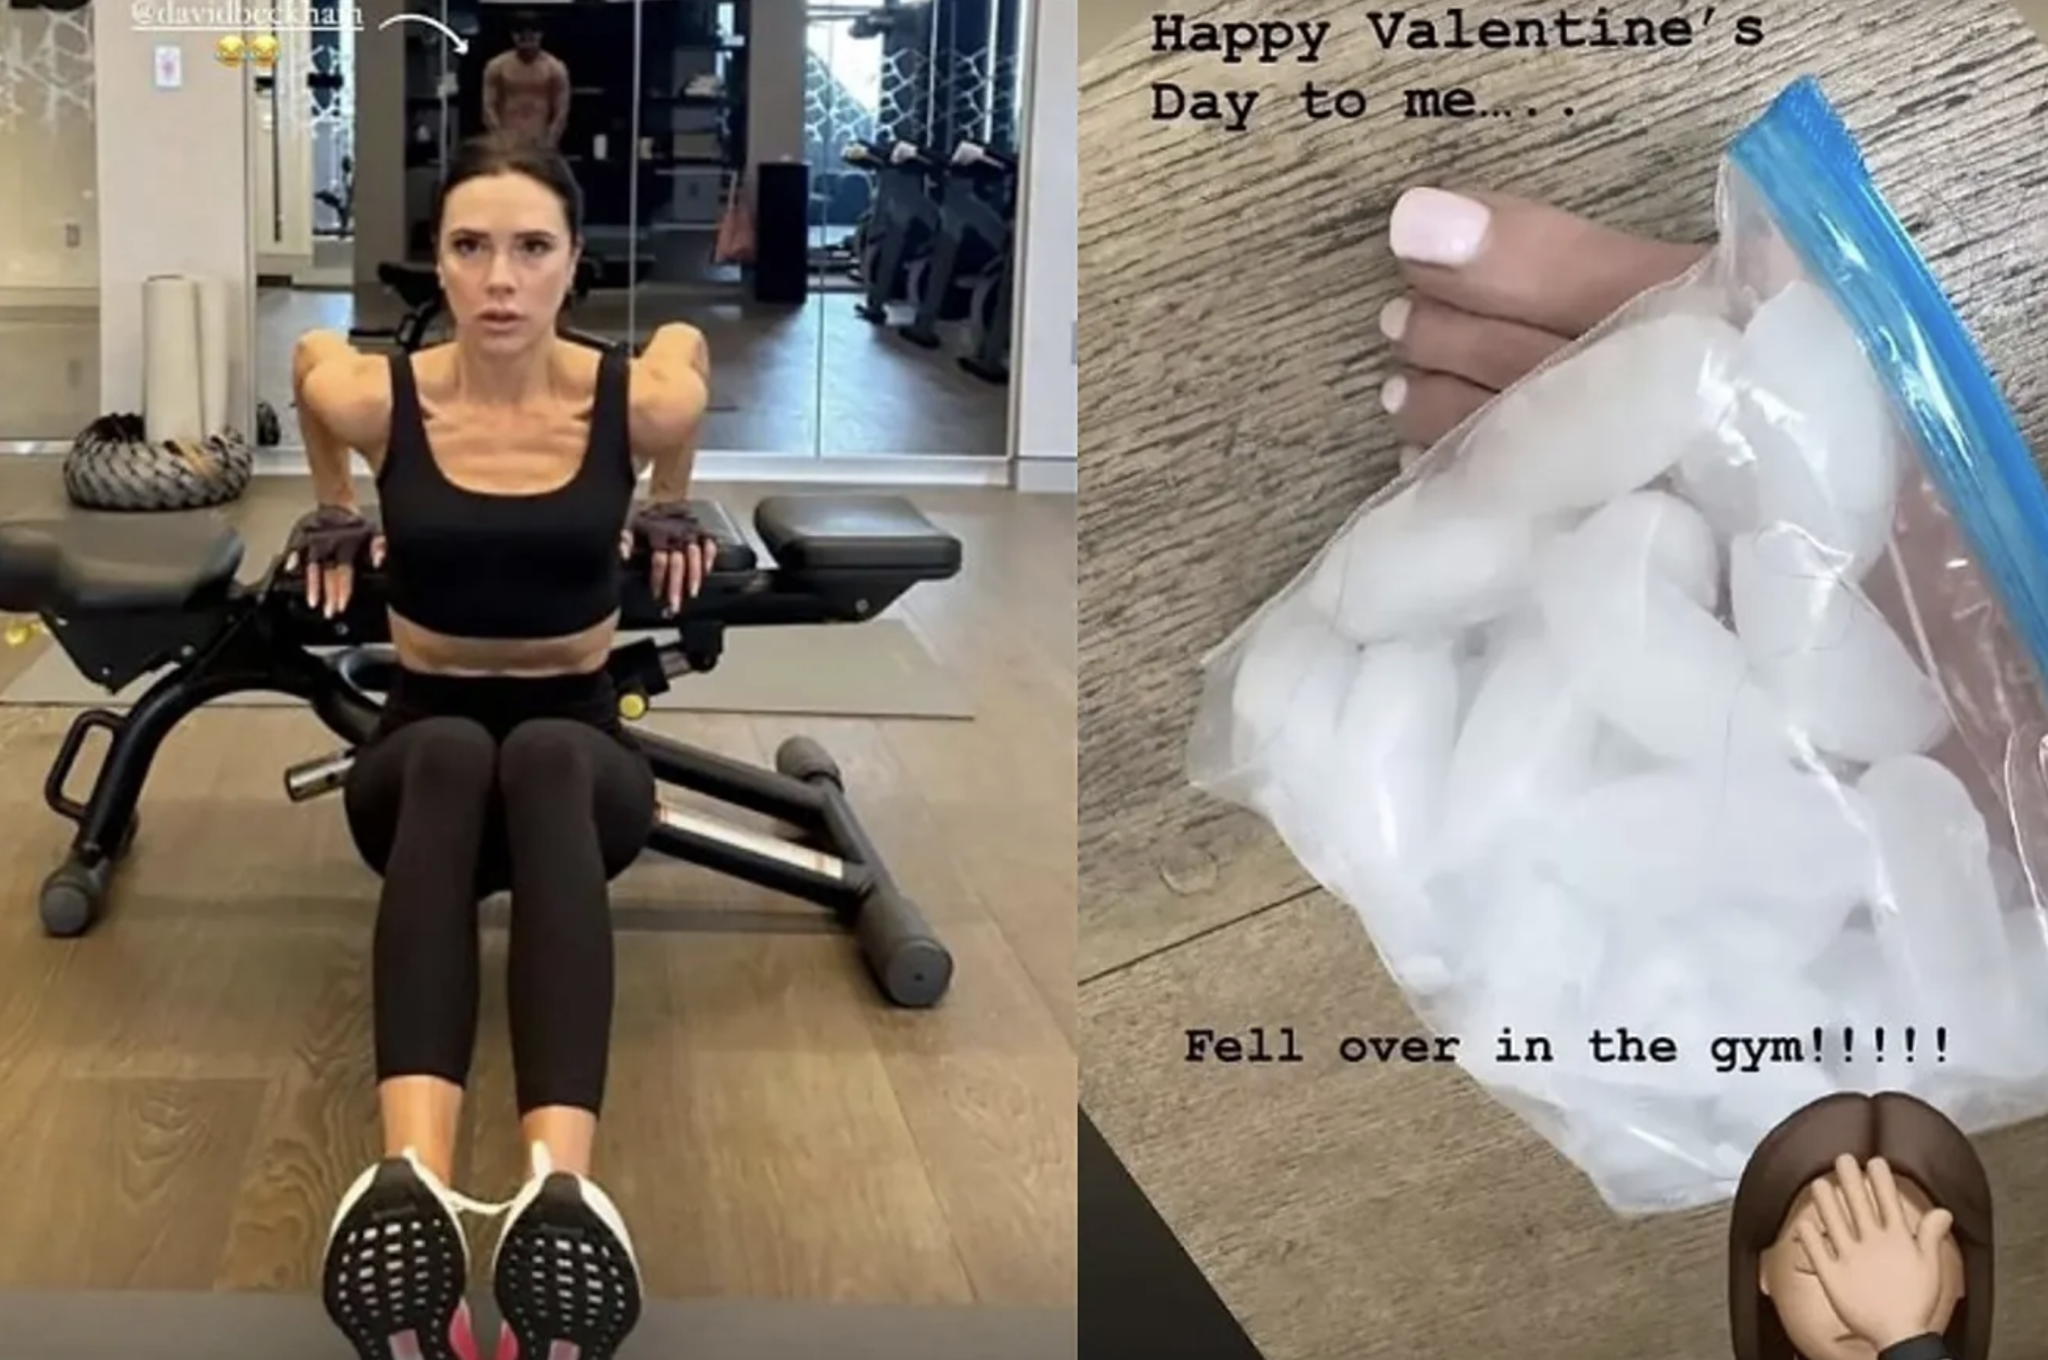 Victoria Beckham suffers unpleasant accident at the gym